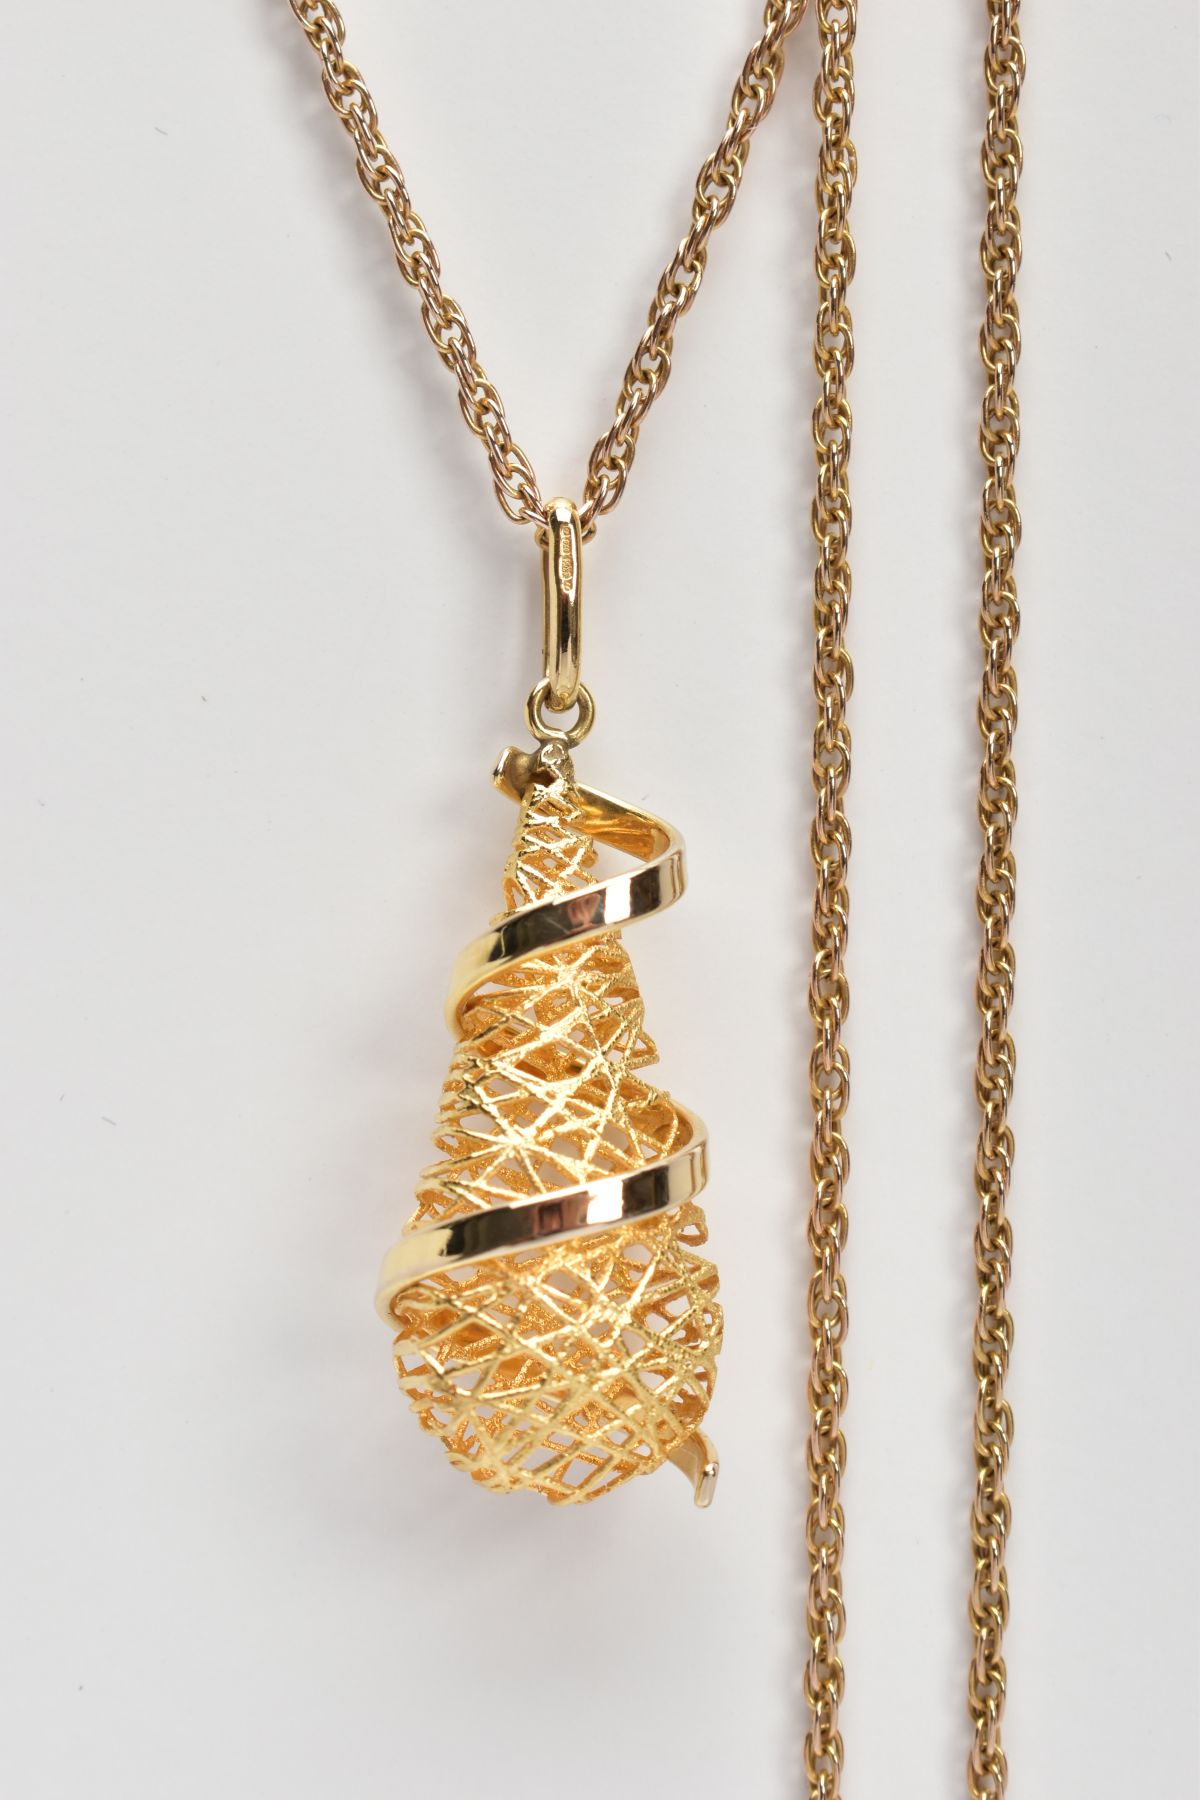 A 9CT GOLD PENDANT NECKLACE, the pendant of an openwork tear drop shape, with a plain polished - Image 2 of 3